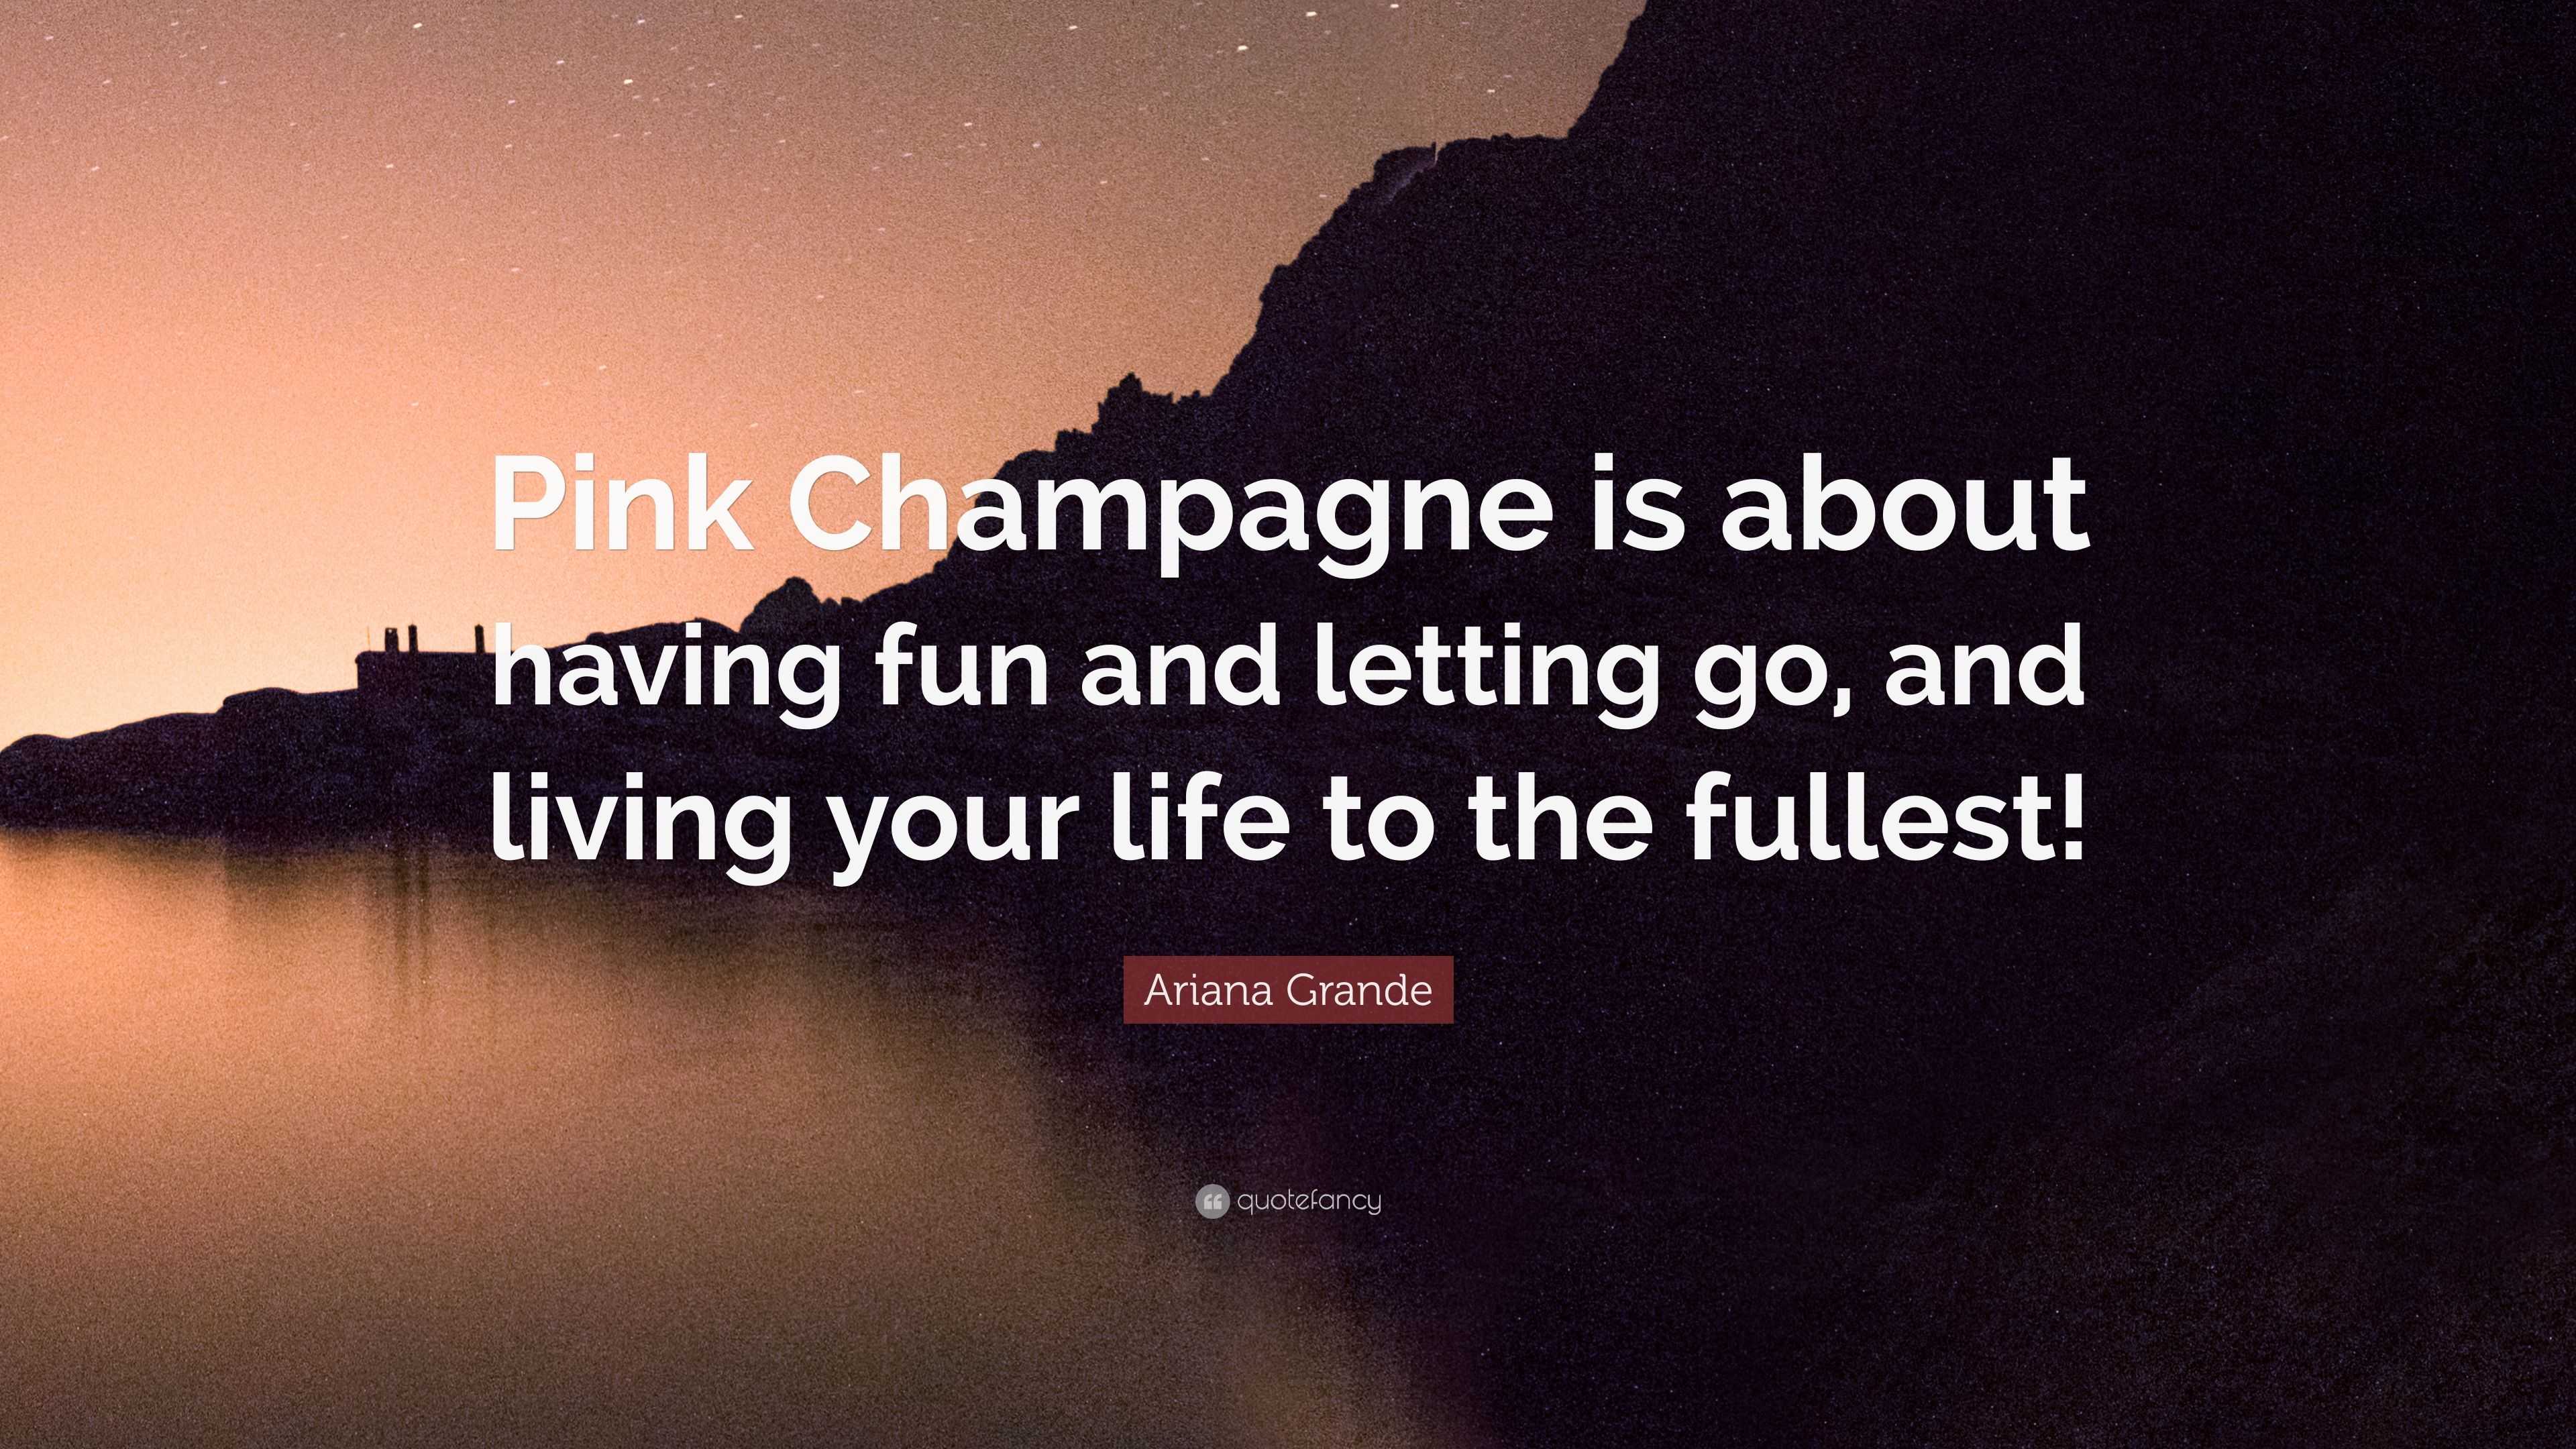 Ariana Grande Quote “Pink Champagne is about having fun and letting go and